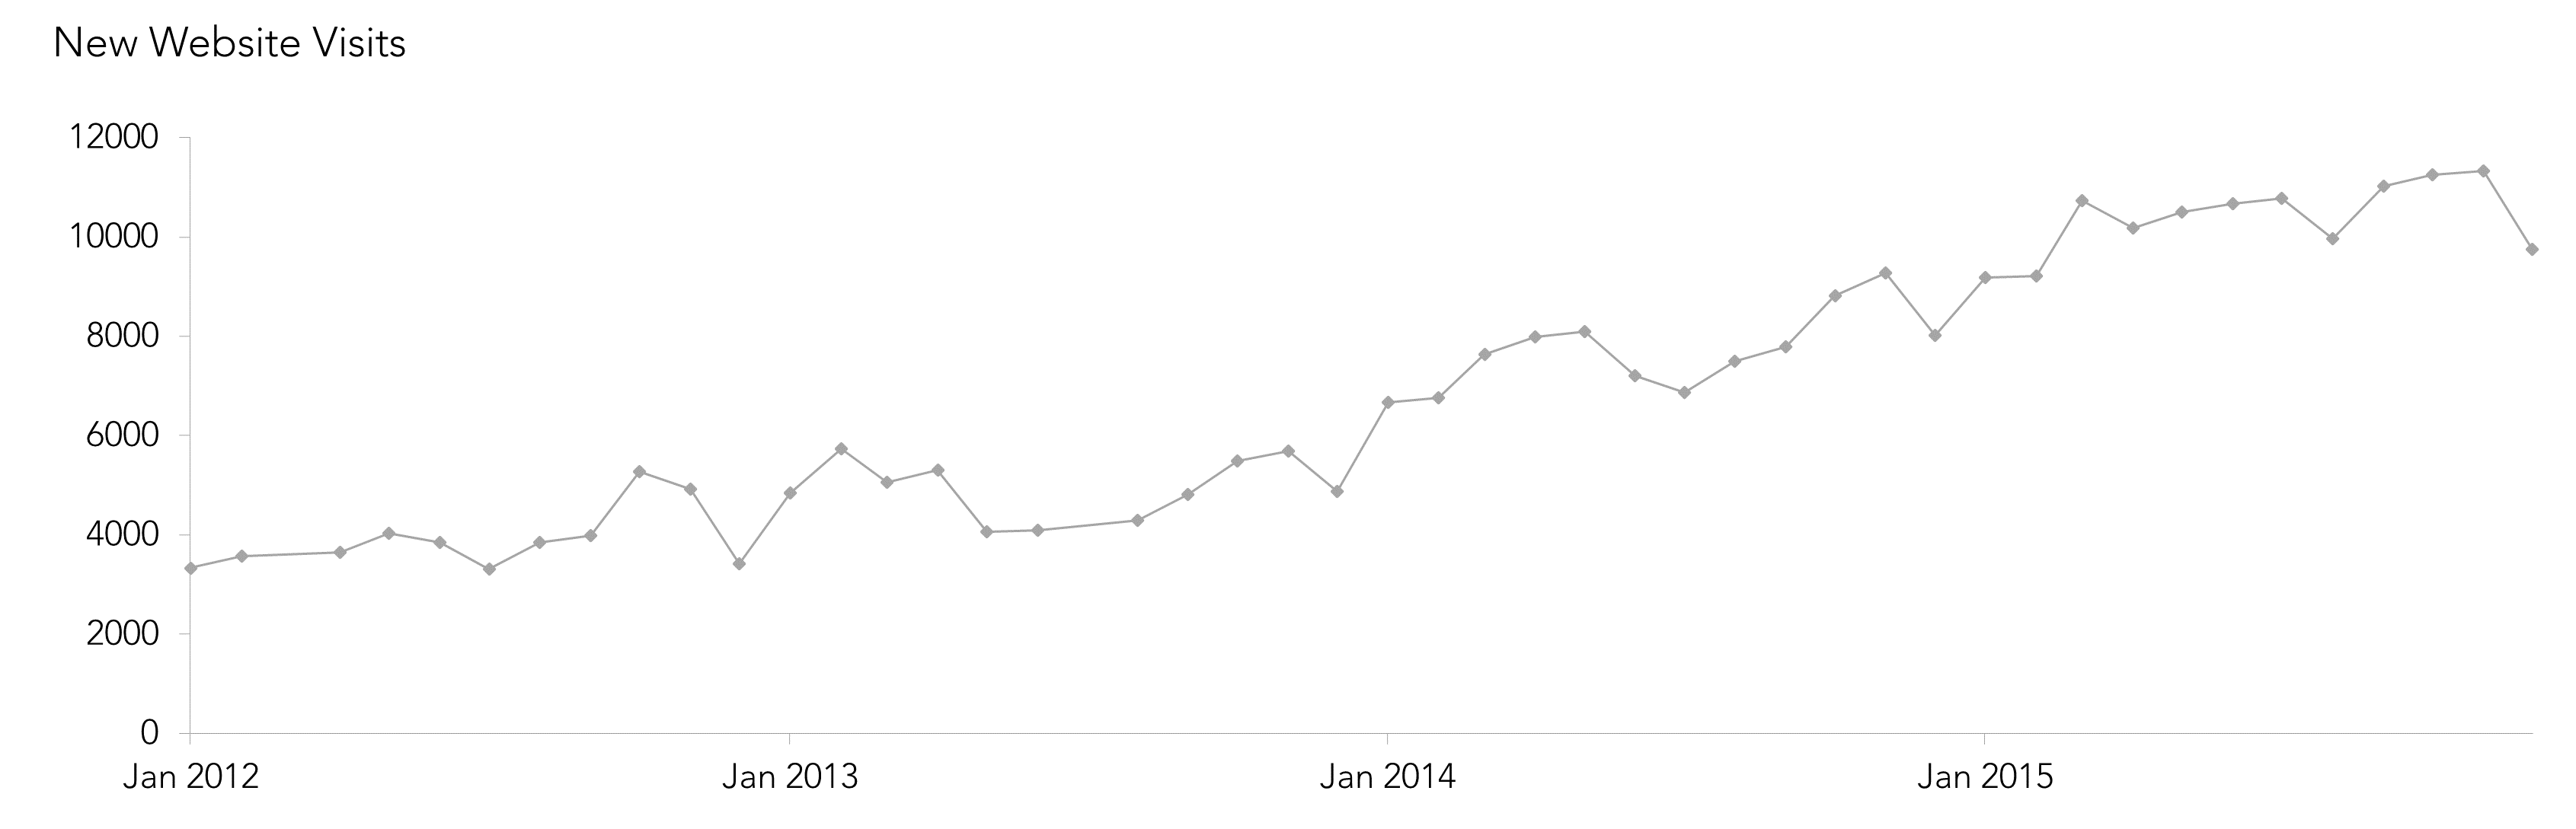 Simple line chart of the New Website Visitors performance measure